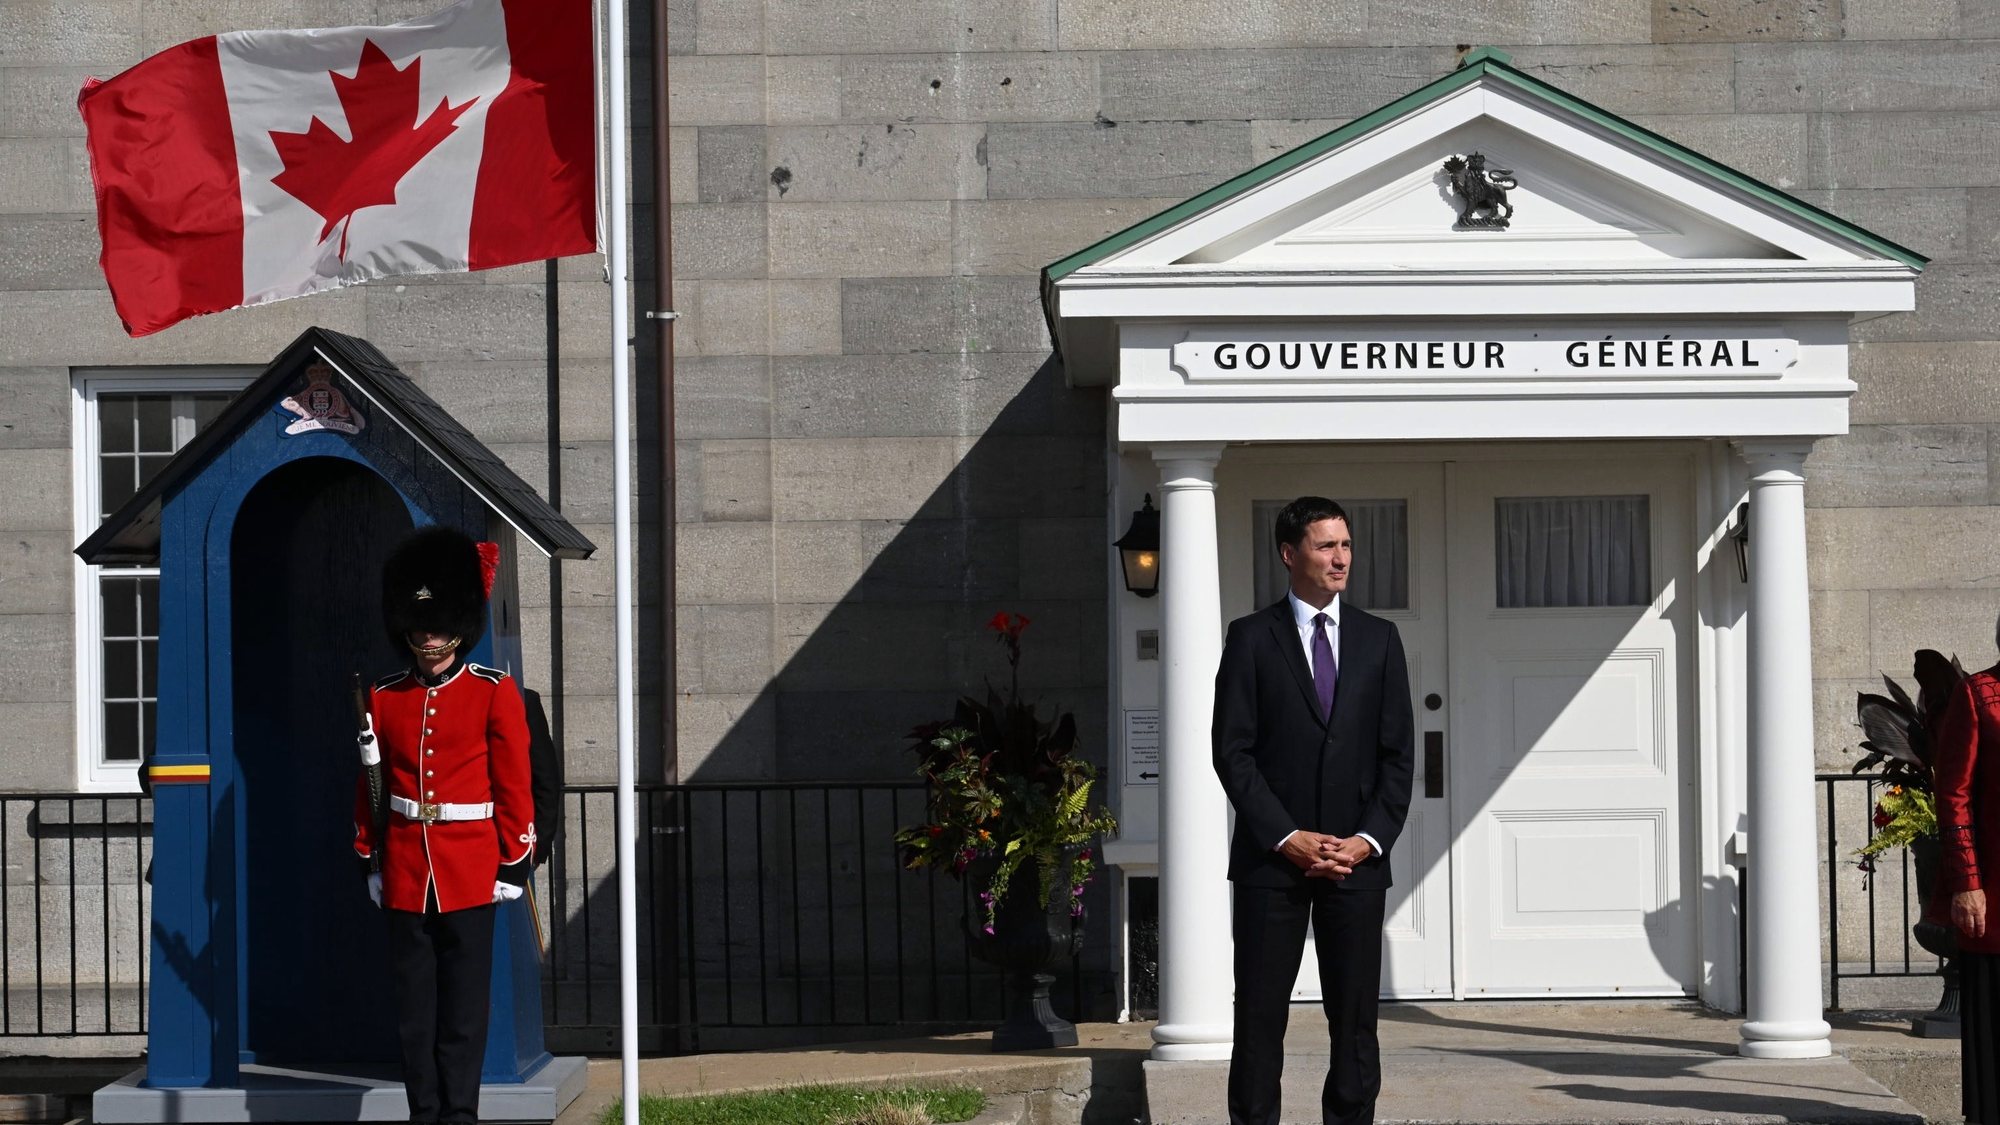 epa10094592 Canadian Prime Minister Justin Trudeau waits for the arrival of Pope Francis at the Citadel of Quebec City, Canada, 27 July 2022. The five-day visit by Pope Francis is the first papal visit to Canada in 20 years.  EPA/Ciro Fusco